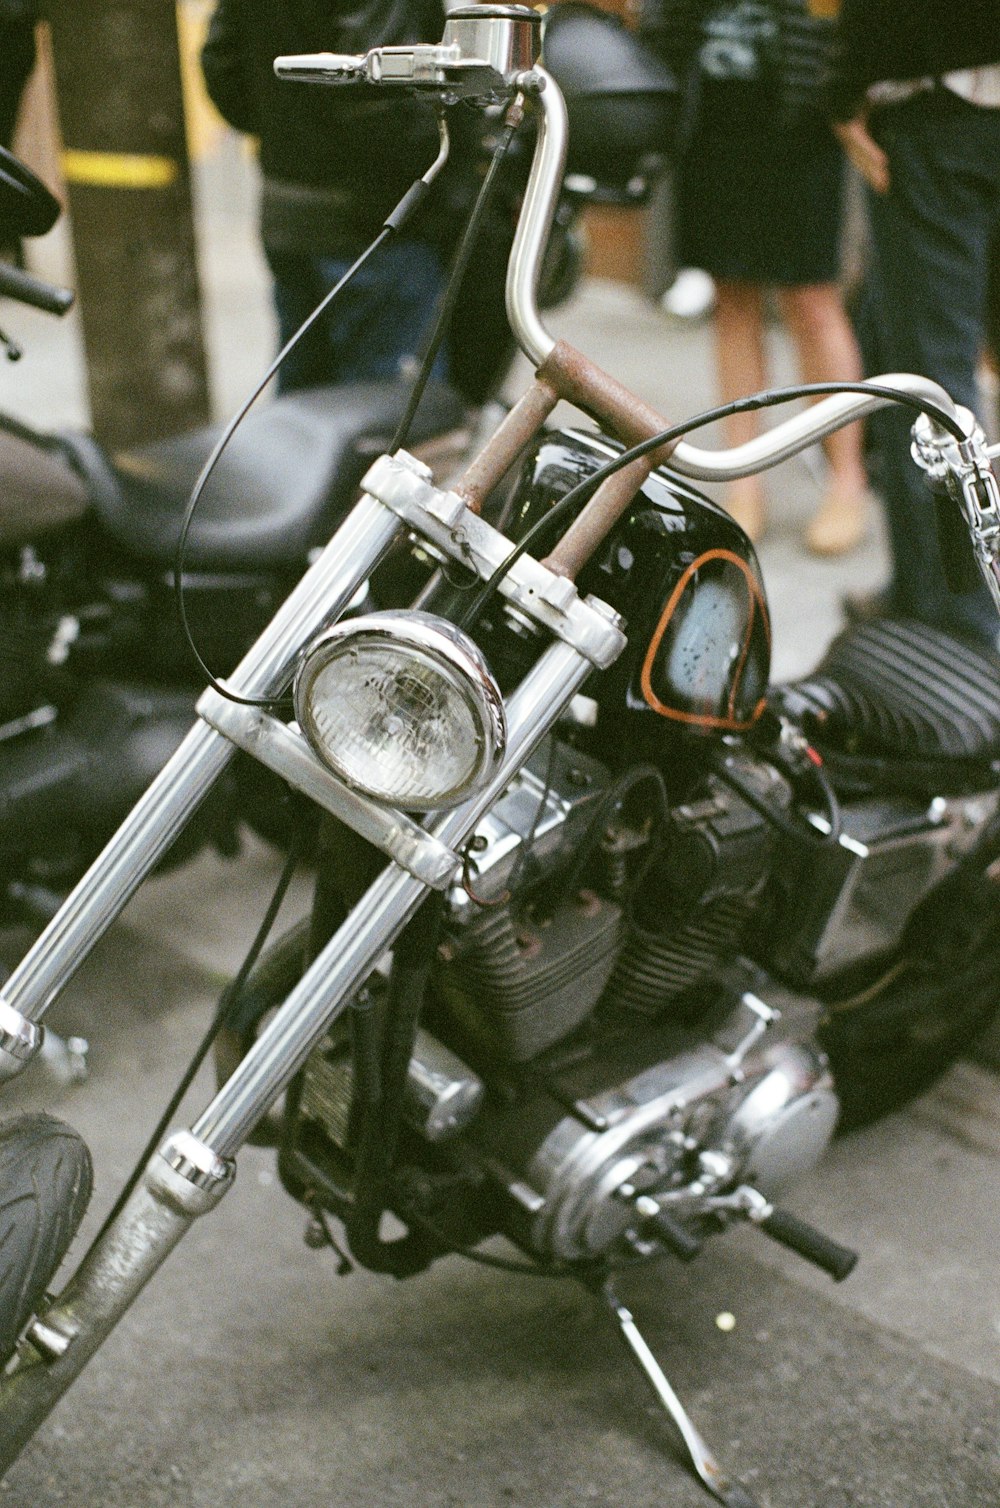 a close up of a motorcycle parked on a street